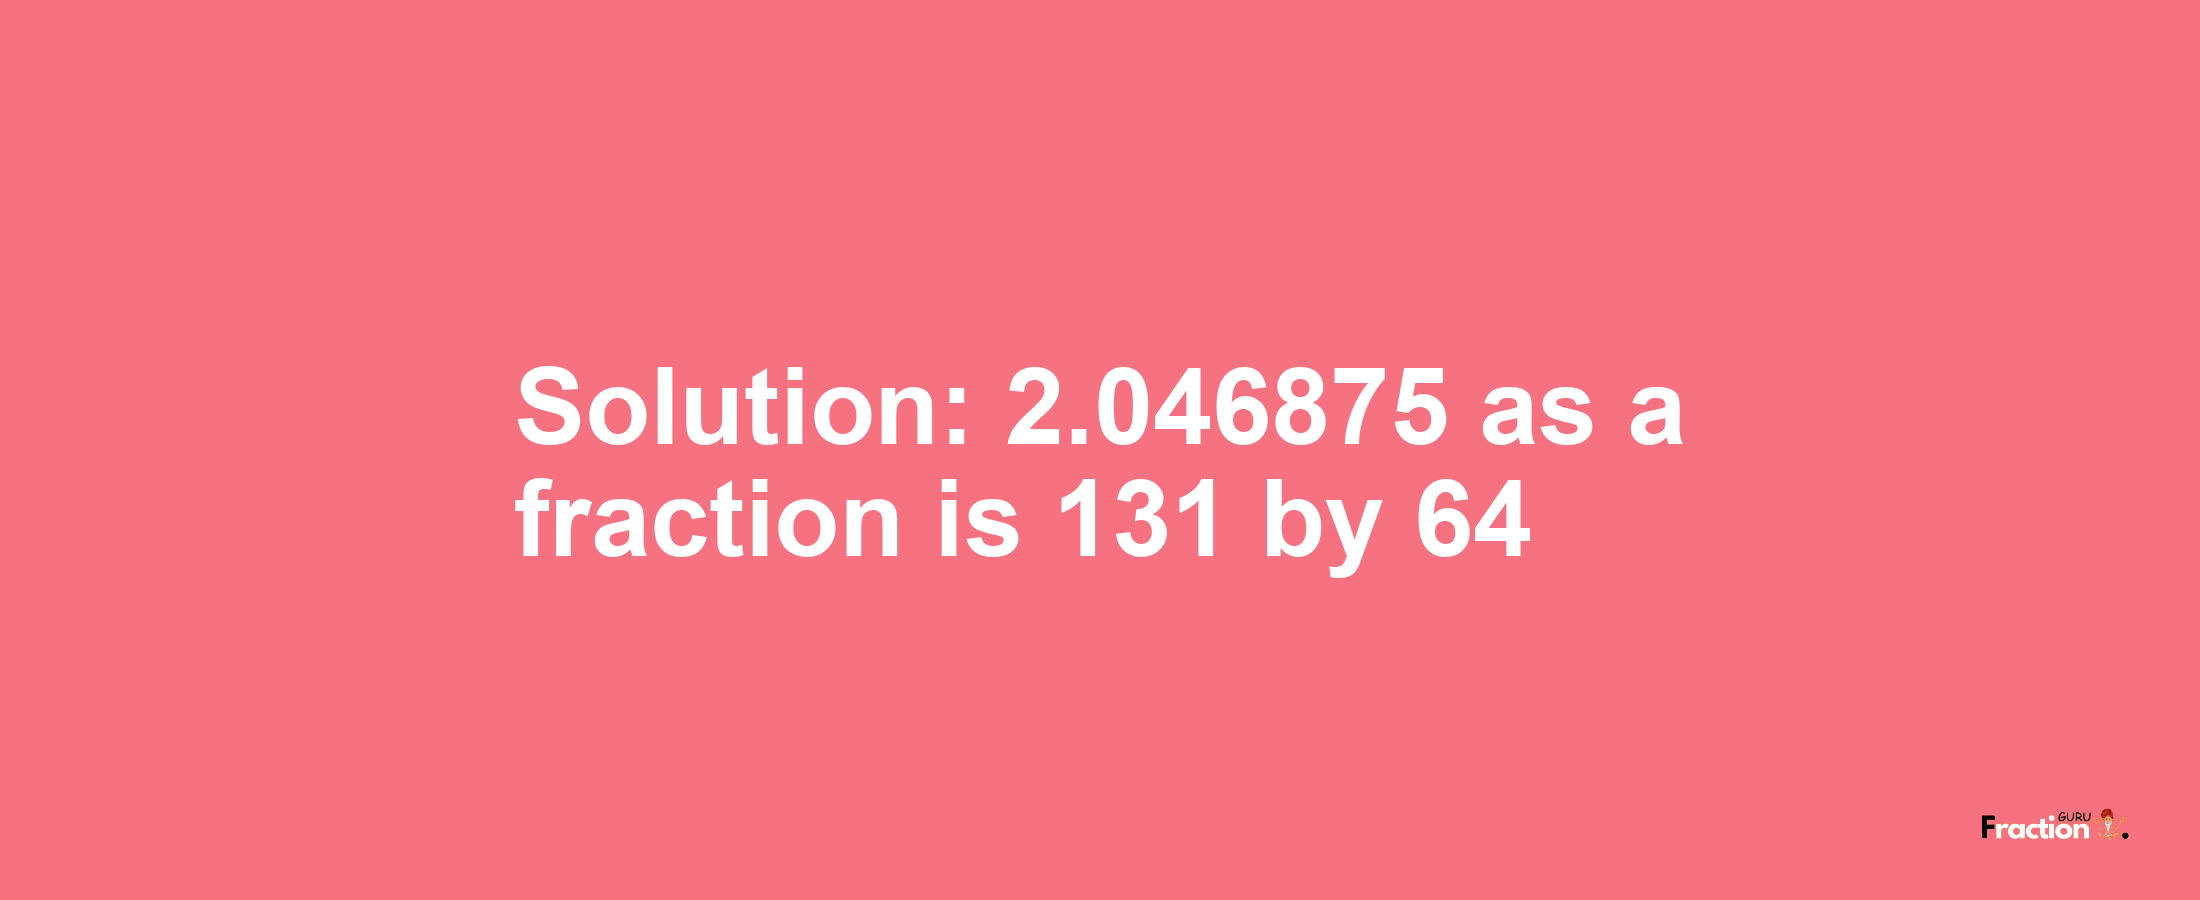 Solution:2.046875 as a fraction is 131/64